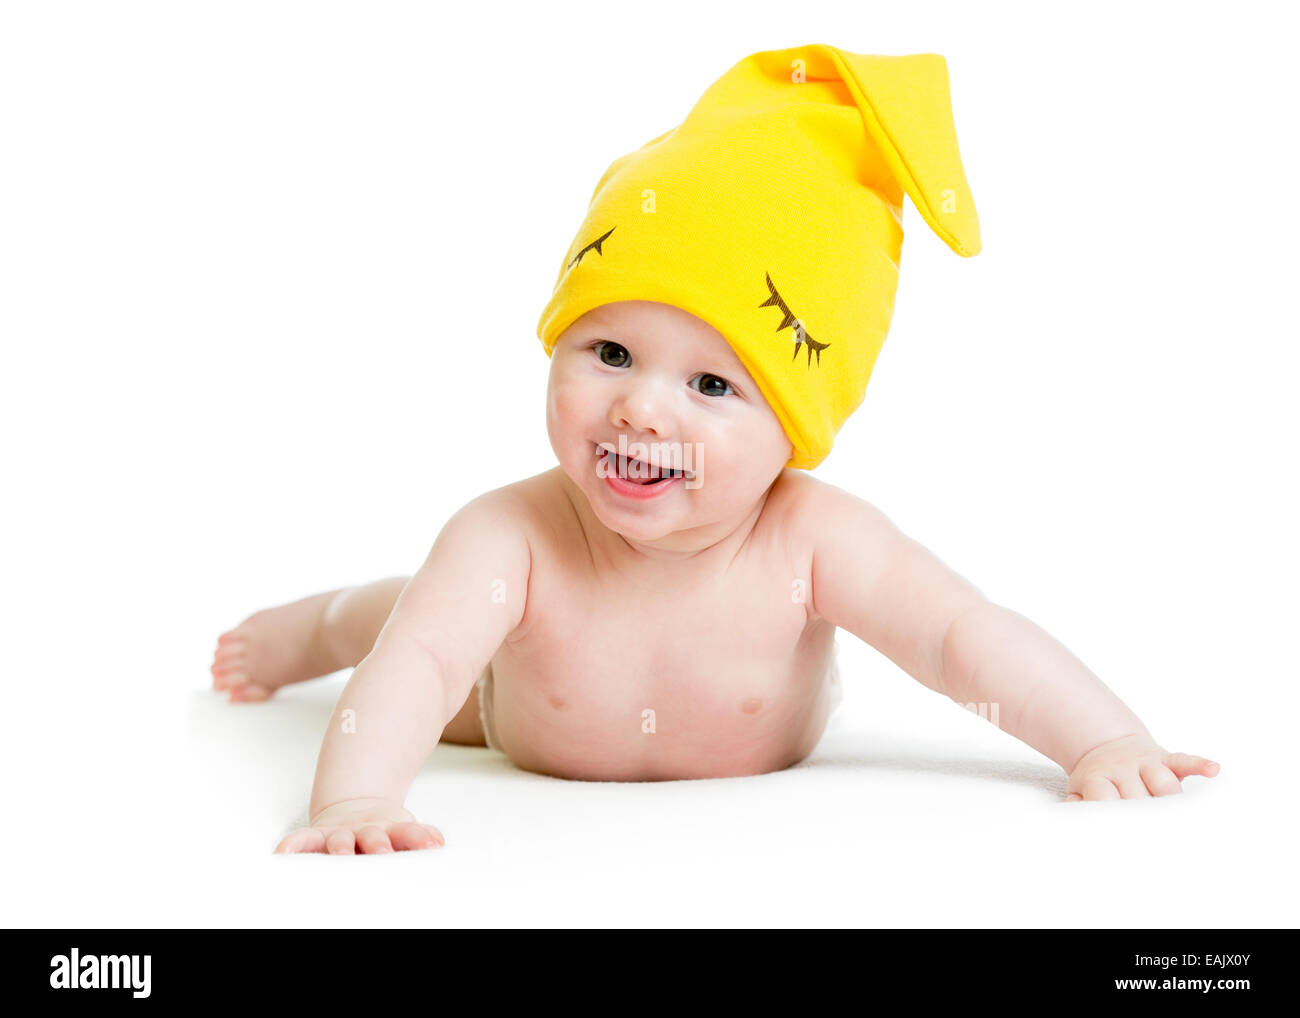 Smiling baby portée funny hat lying on stomach Banque D'Images